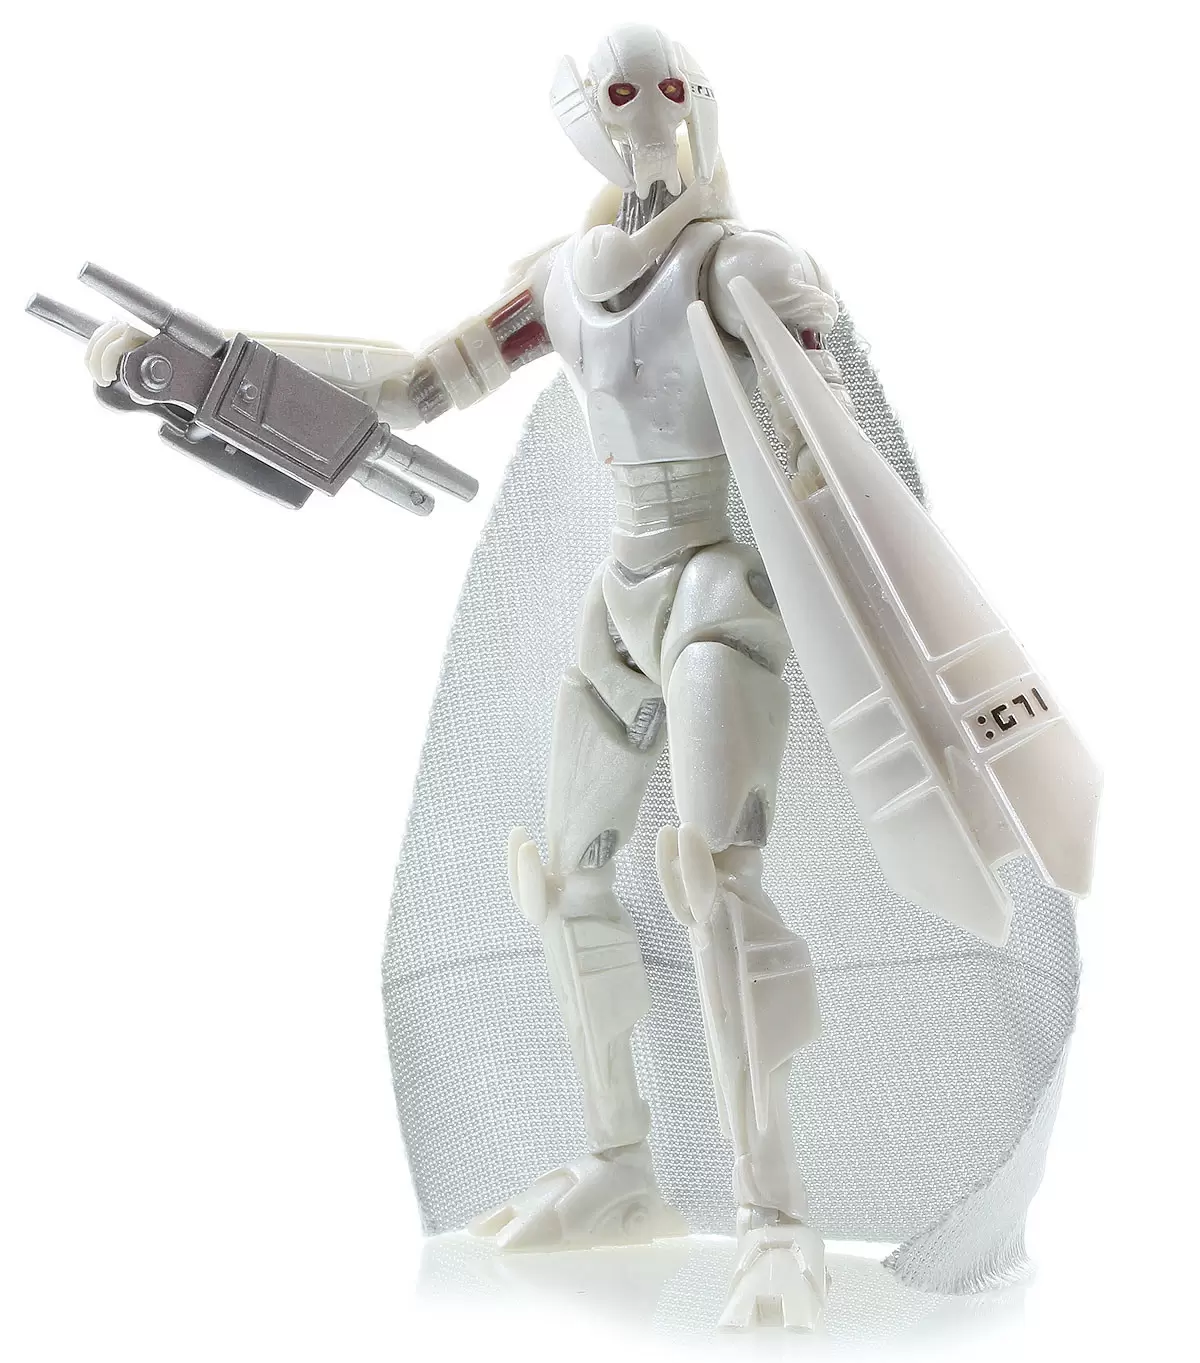 30th Anniversary Collection (TAC) - Concept General Grievous